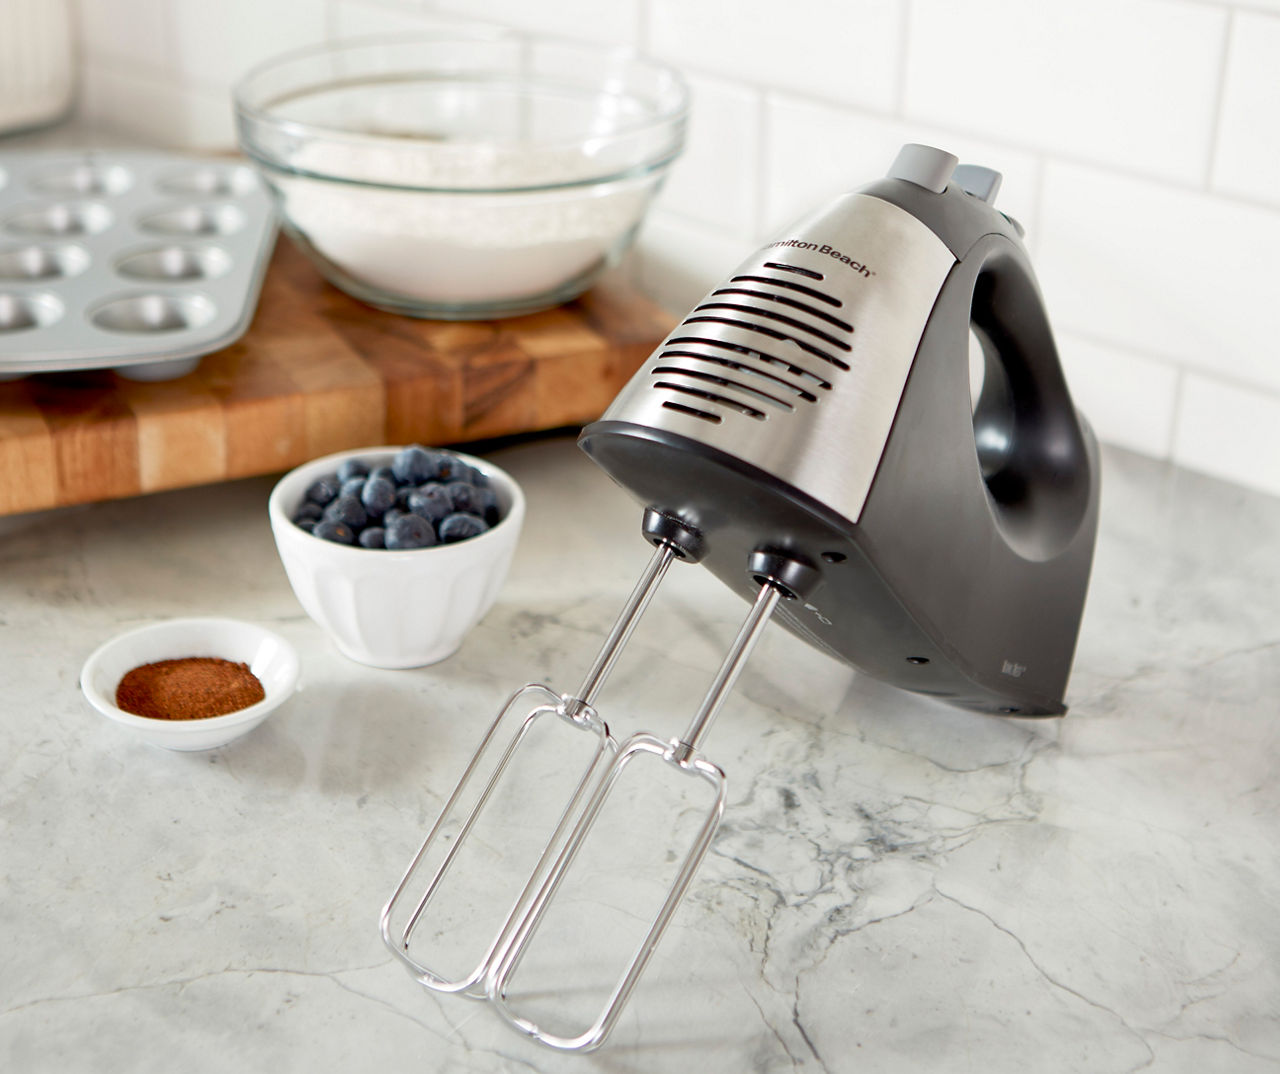  Hamilton Beach 6-Speed Electric Hand Mixer with Whisk